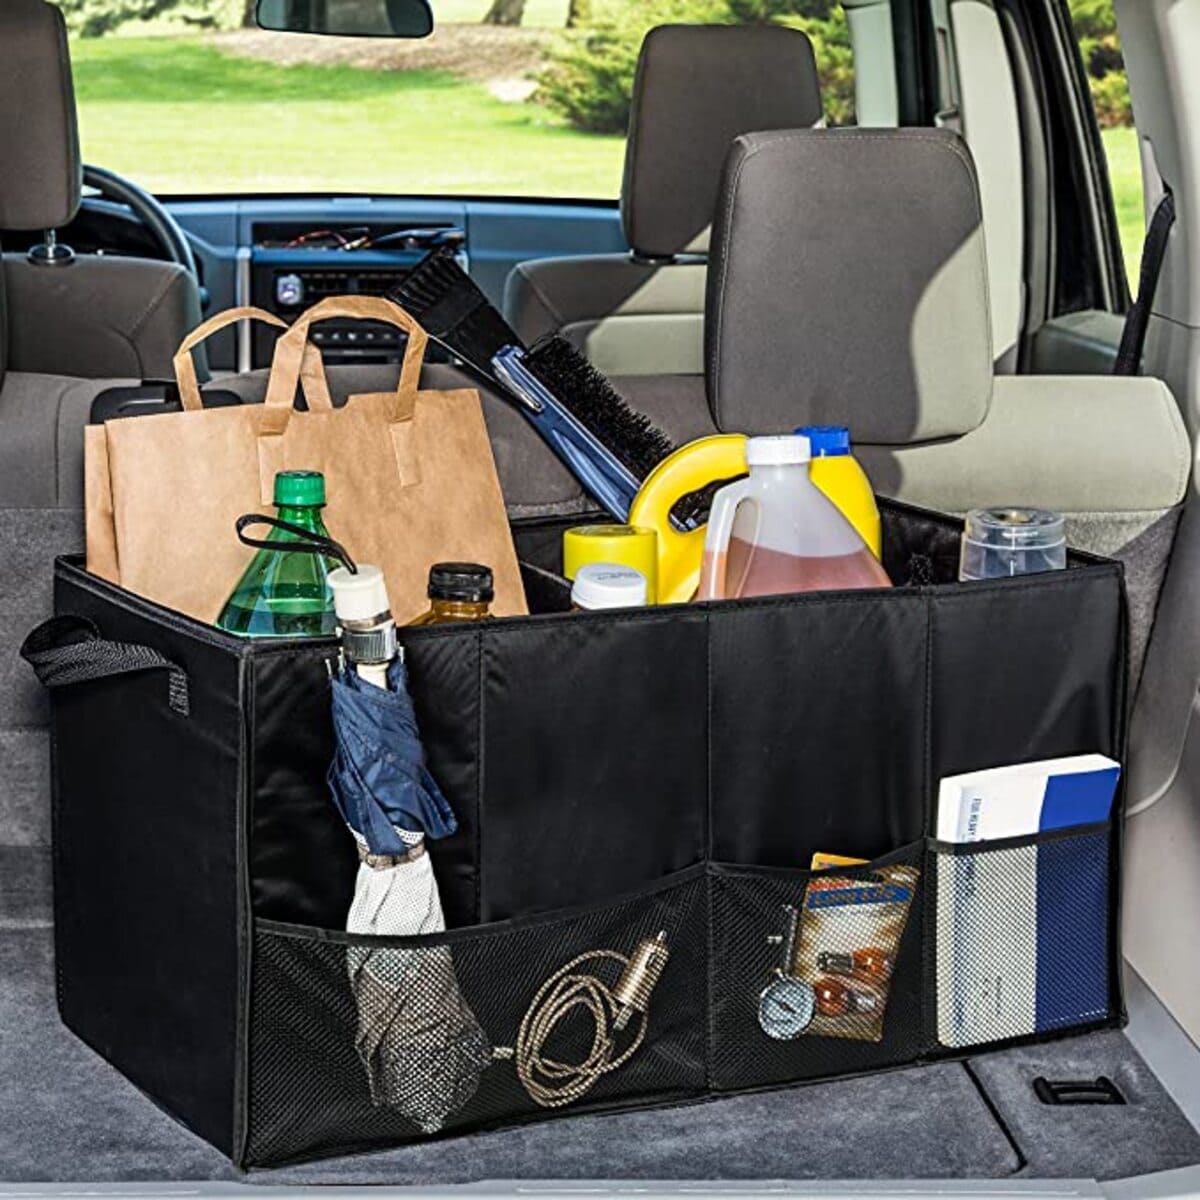 Honey-Can-Do Collapsible Trunk Organizer